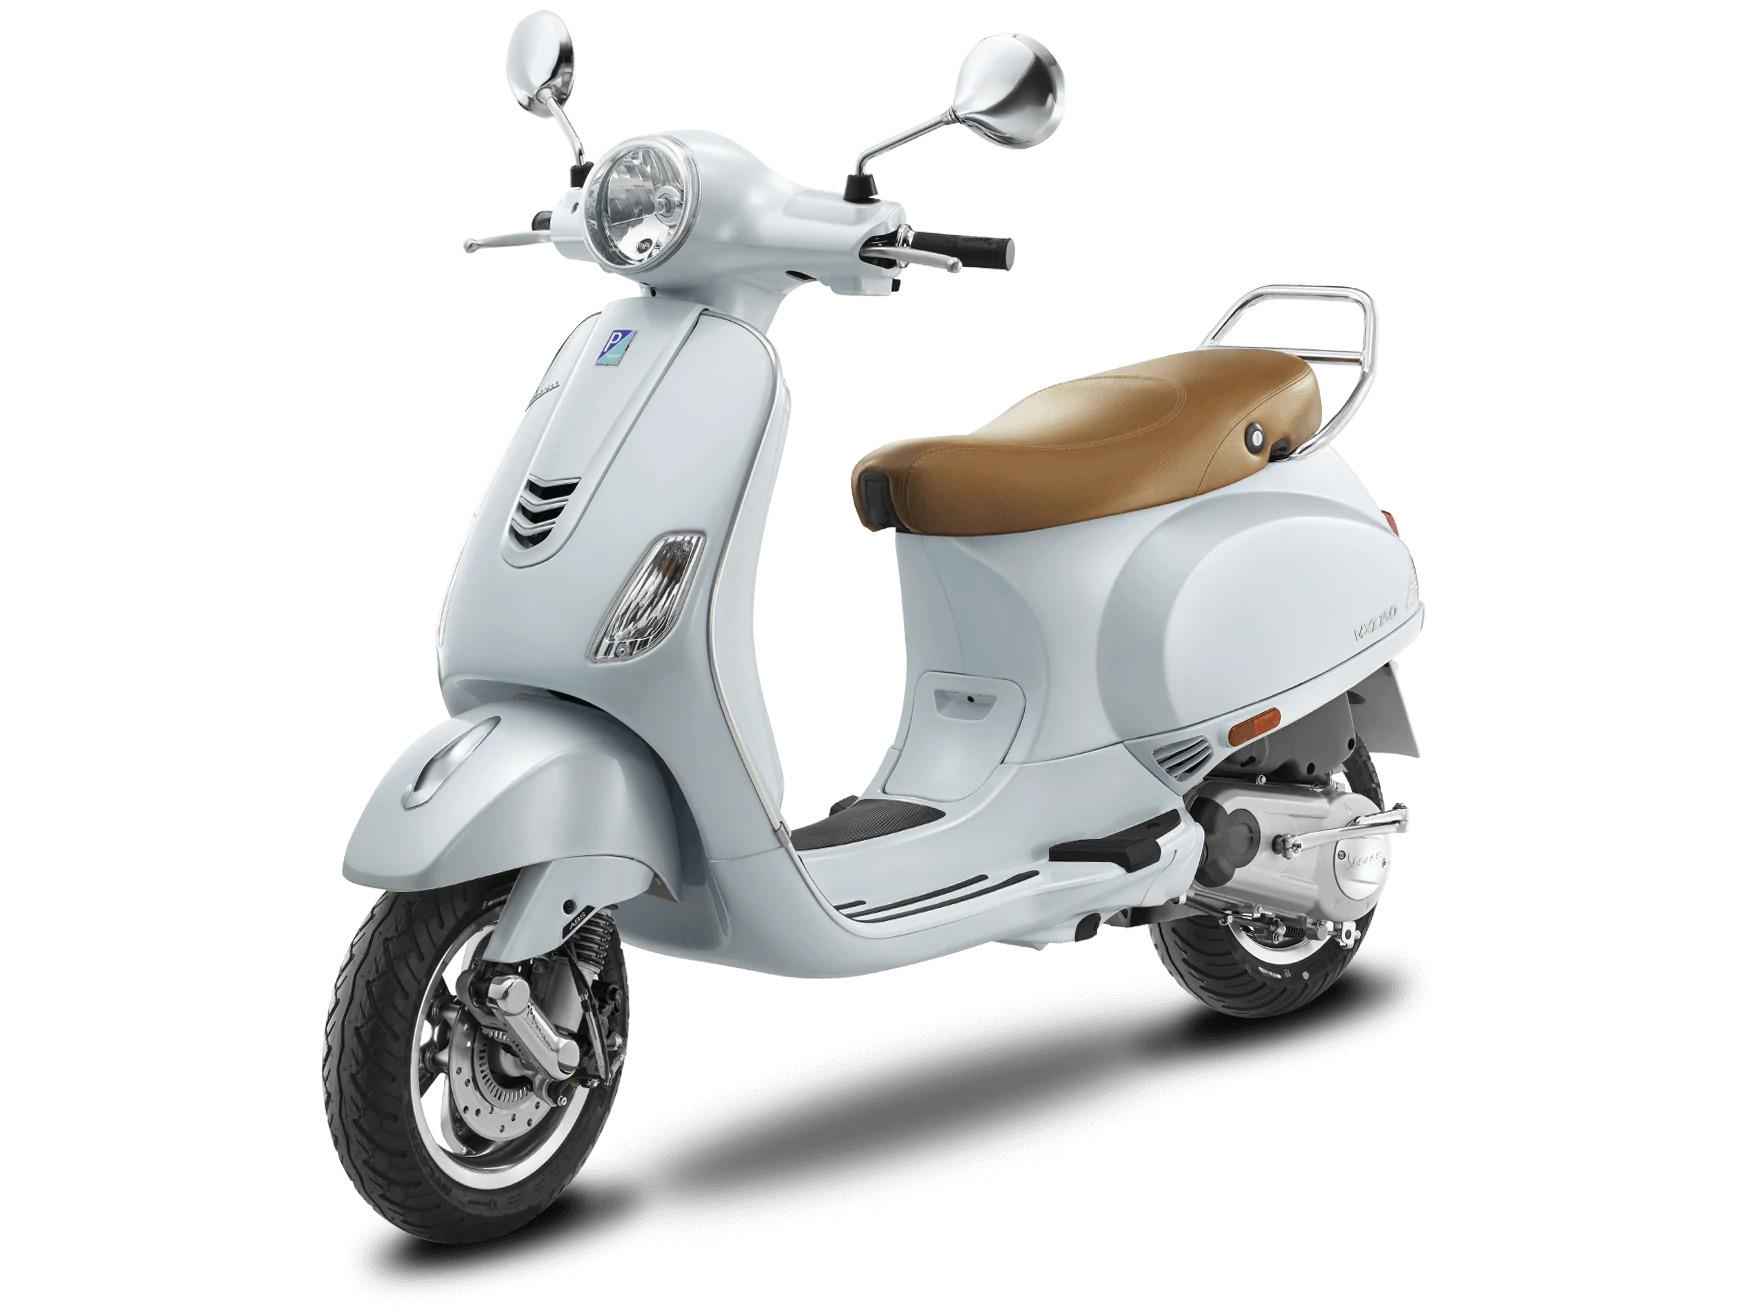 2023 Vespa VXL 125 BS6 Price in India [Full Specifications]